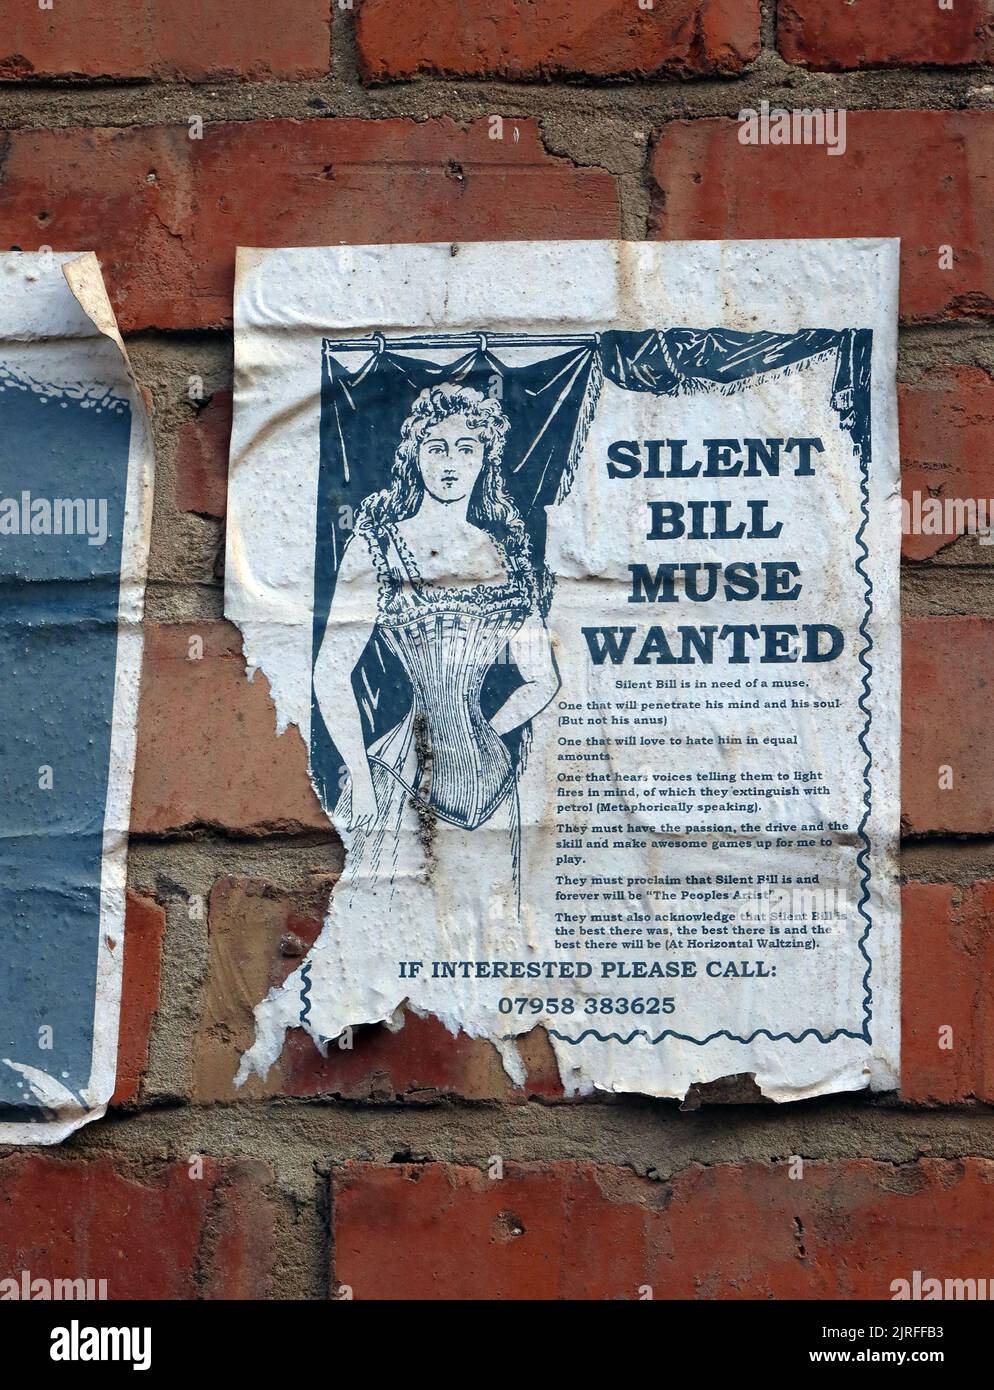 Silent Bill Muse, Wanted - 07958-383625, Deansgate, Blackpool , Lancs, Inghilterra, FY1 1BN Foto Stock